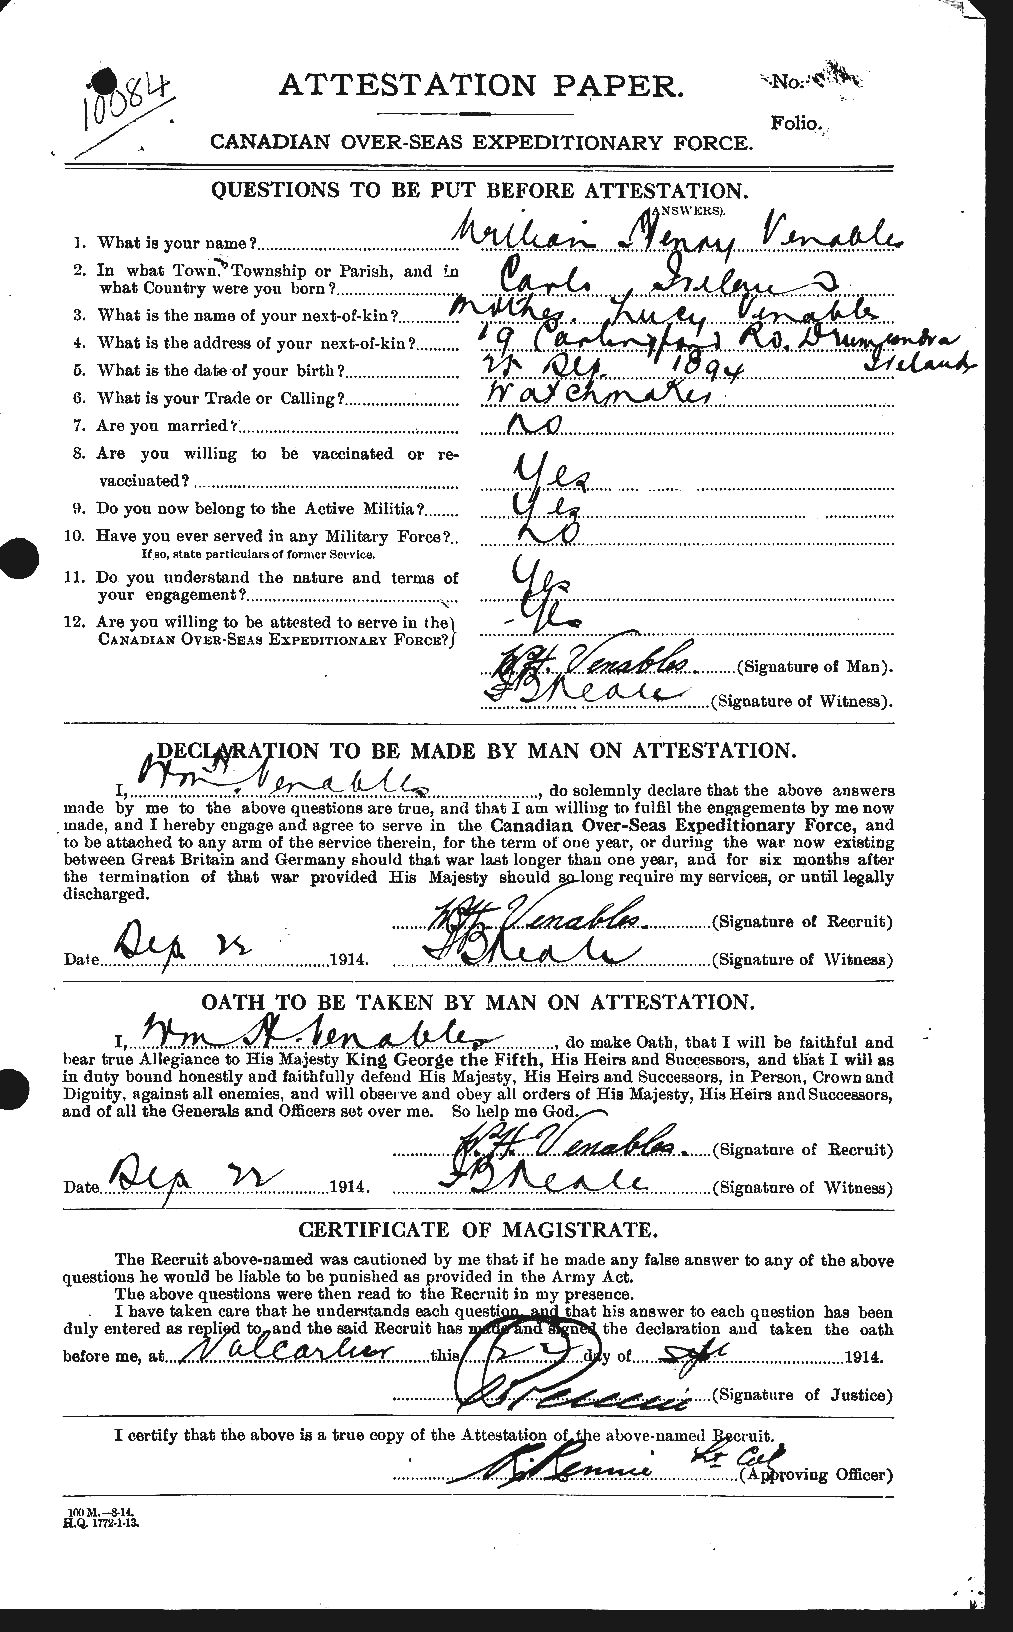 Personnel Records of the First World War - CEF 649240a